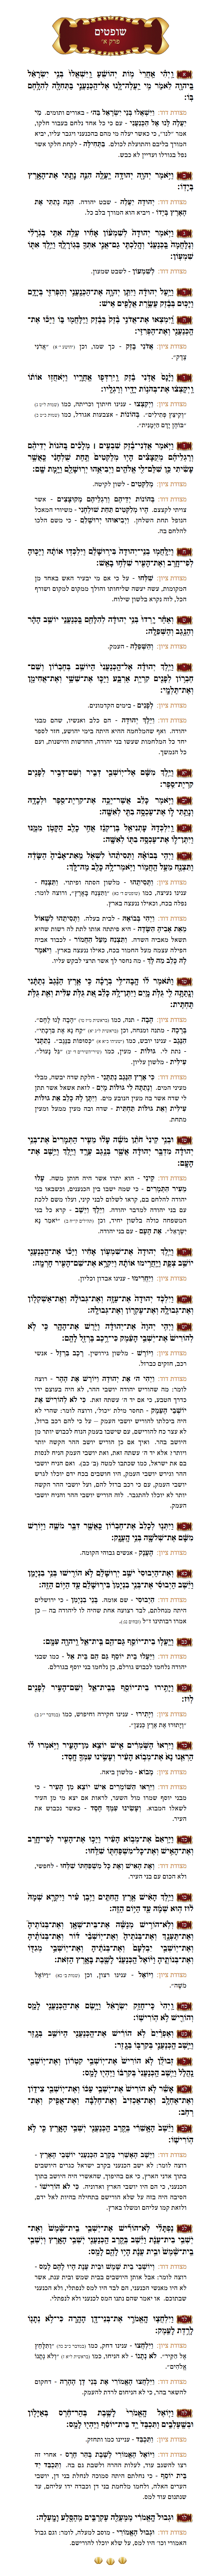 Sefer Shoftim Chapter 1 with commentary